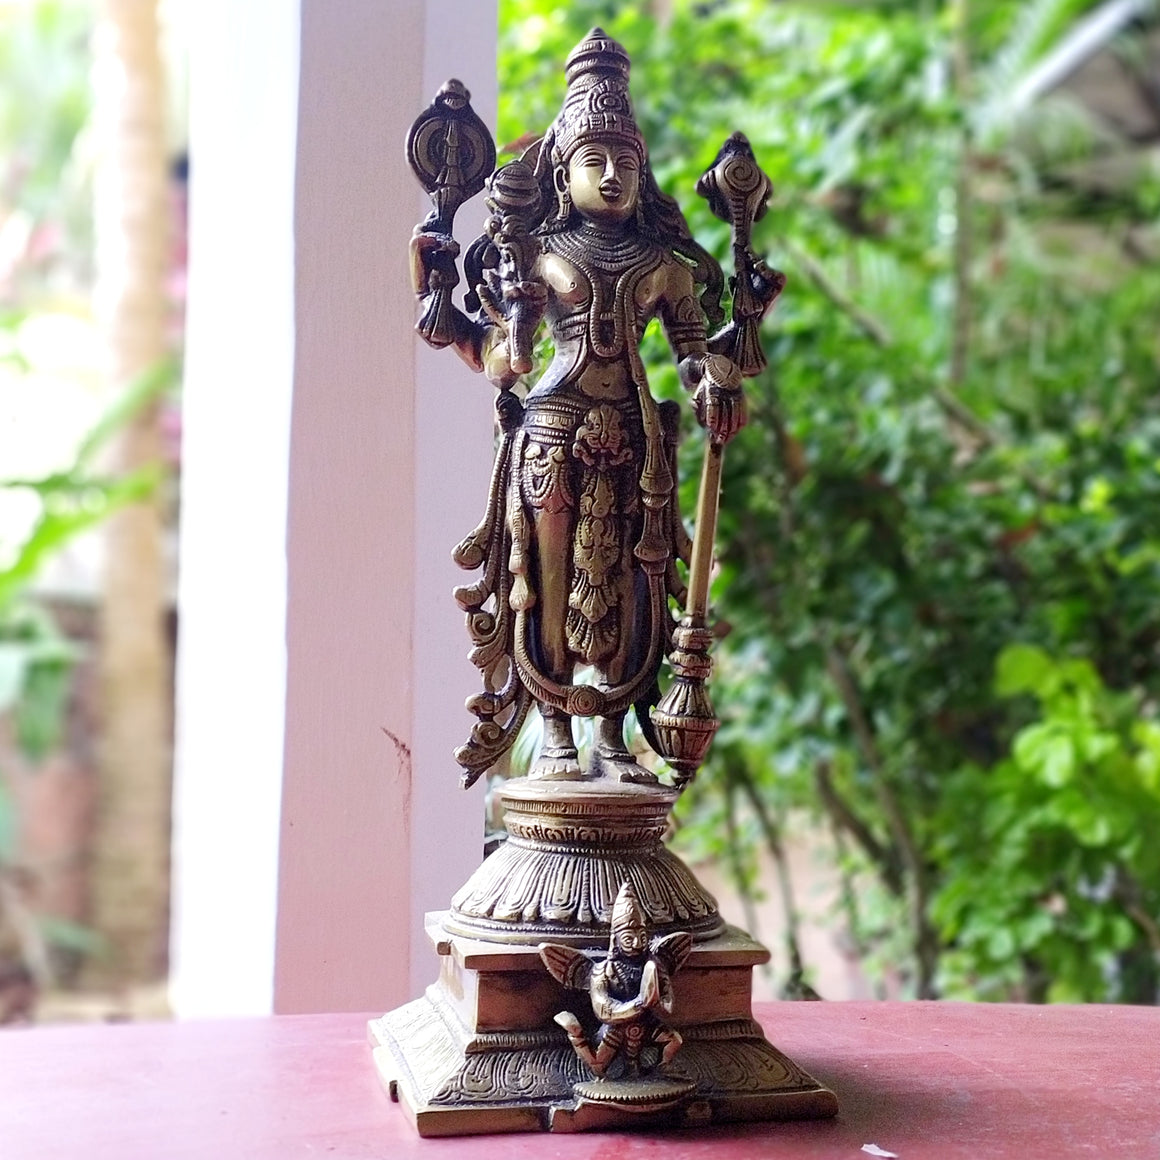 Magnificent 37 cm Tall Brass Sculpture Of Lord Vishnu - Protector Of The World